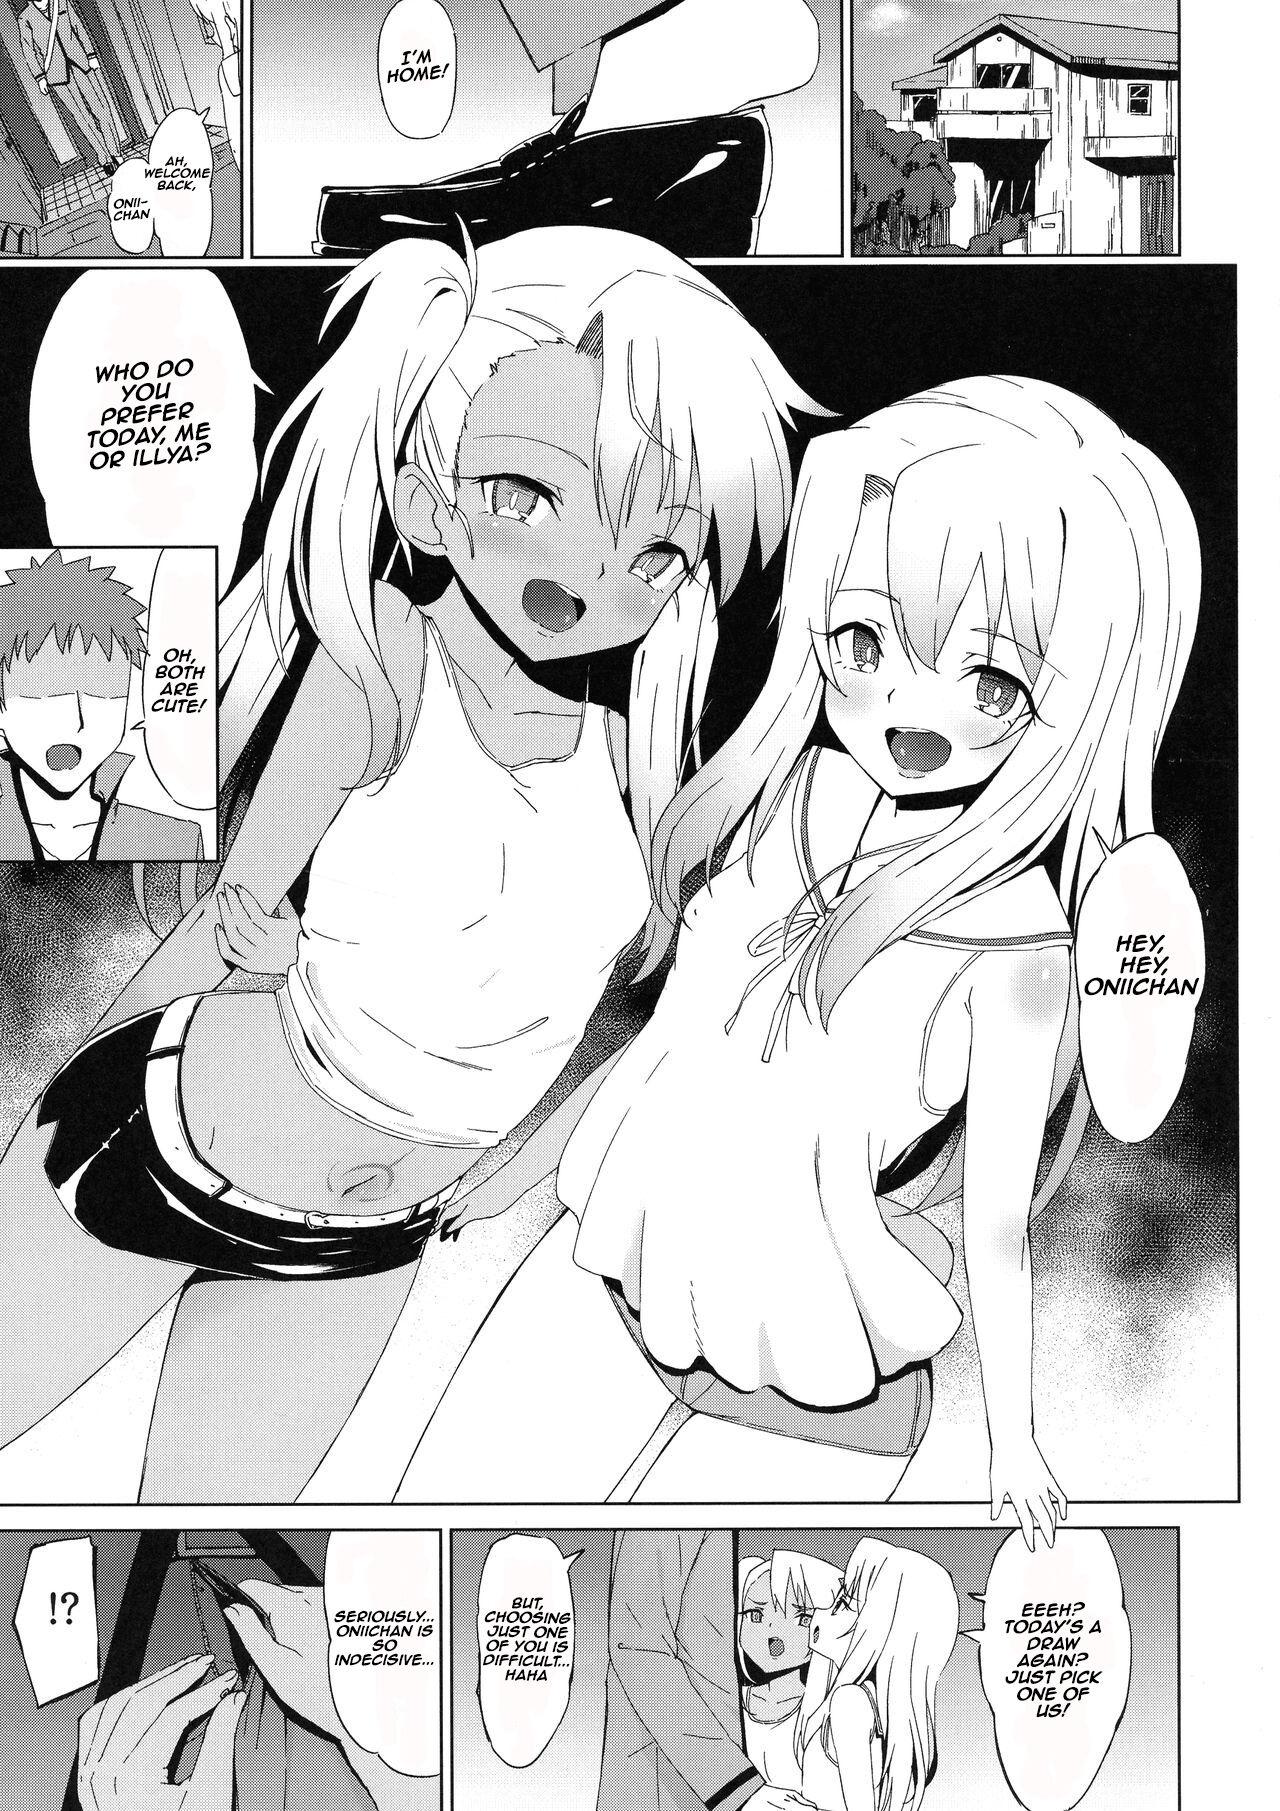 Vagina Oshiete Onii-chan - Fate kaleid liner prisma illya Candid - Picture 3